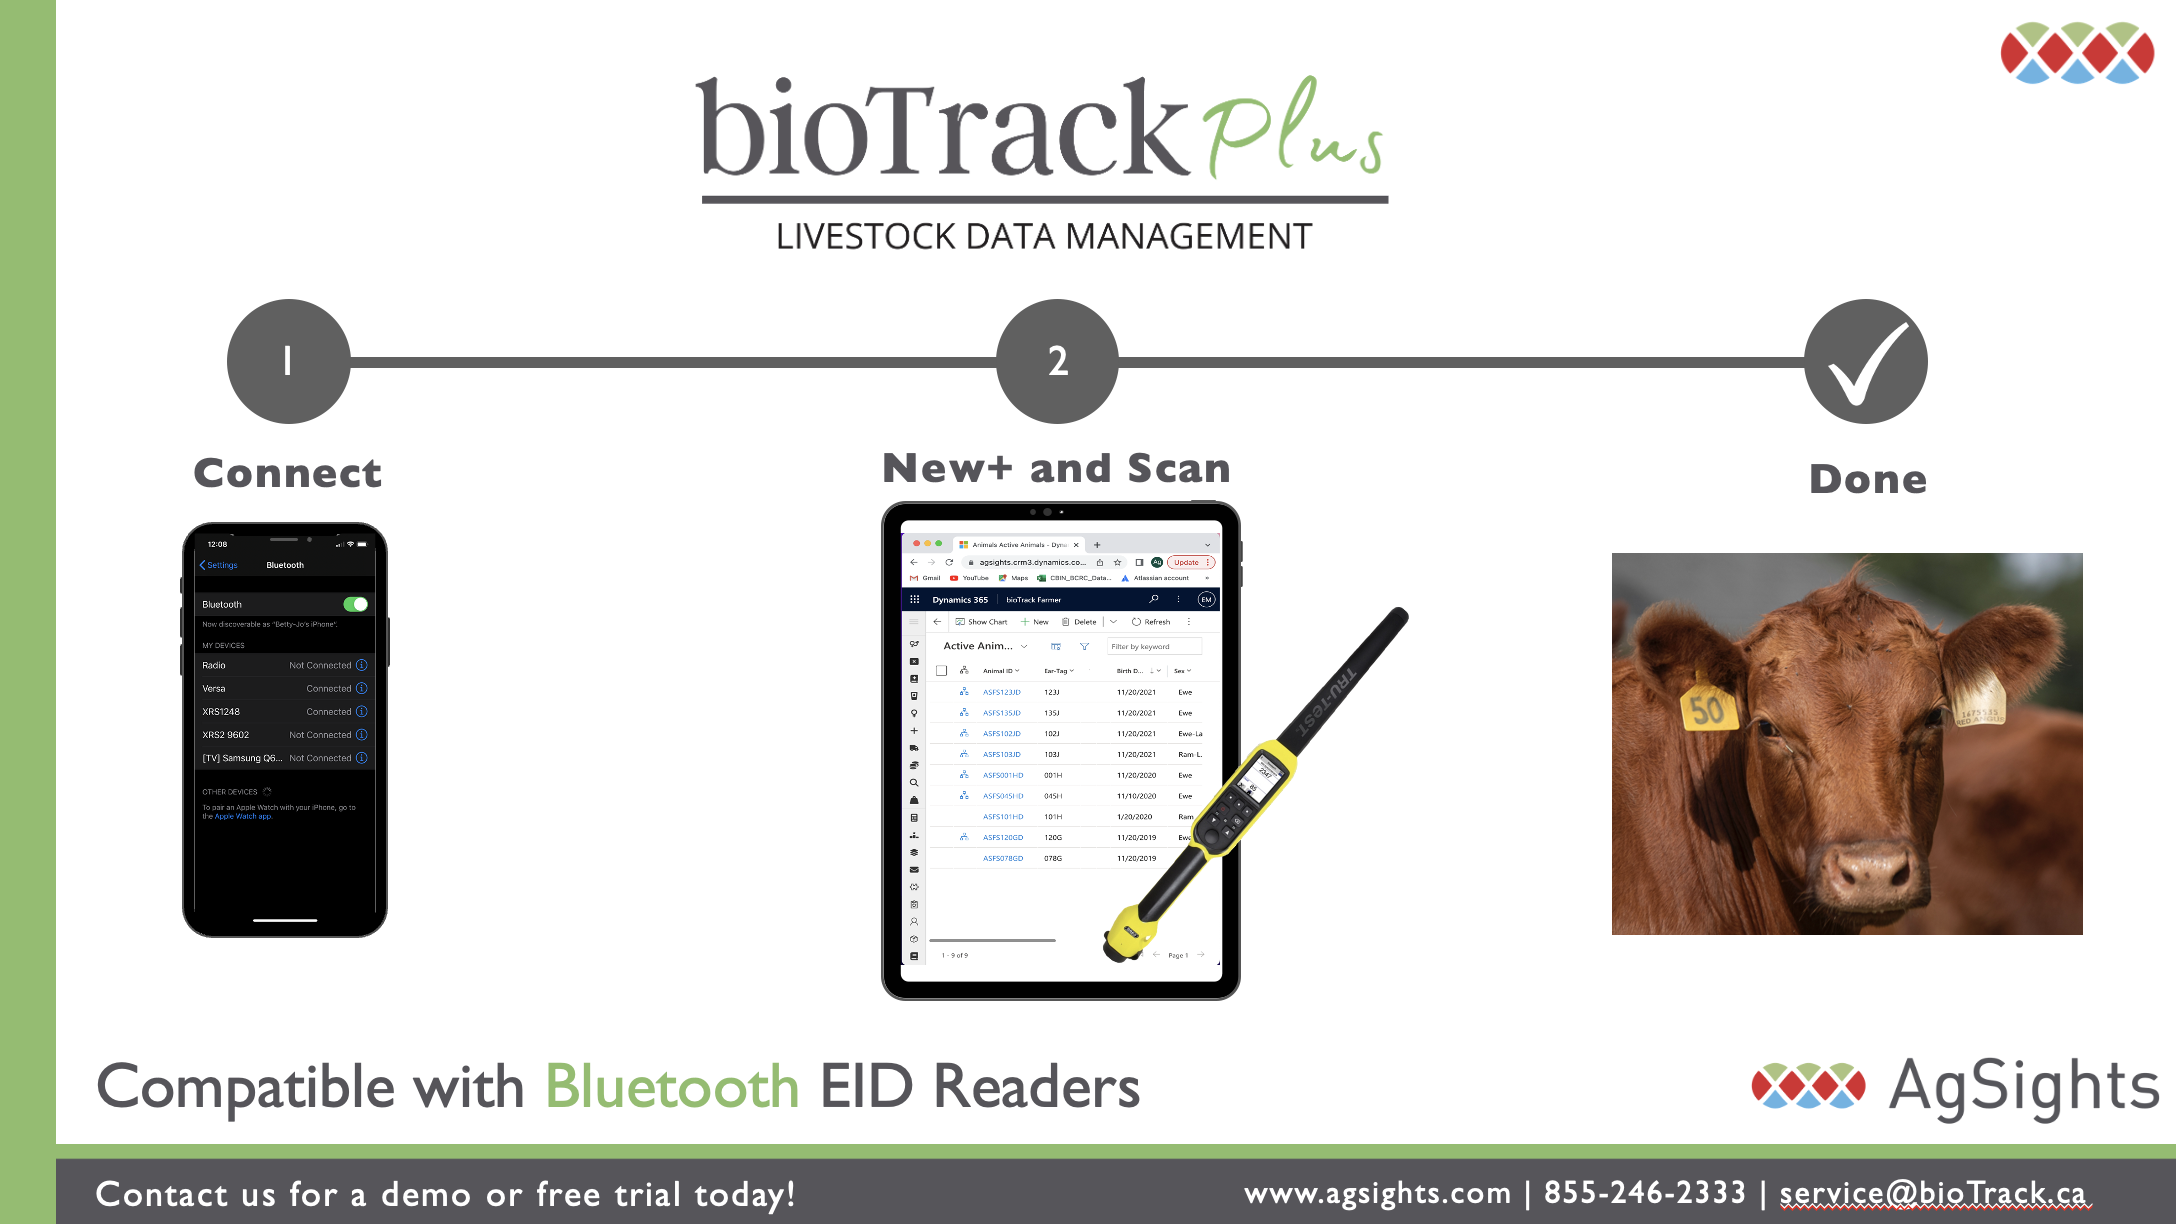 bioTrack Plus is compatible with BlueTooth EID readers